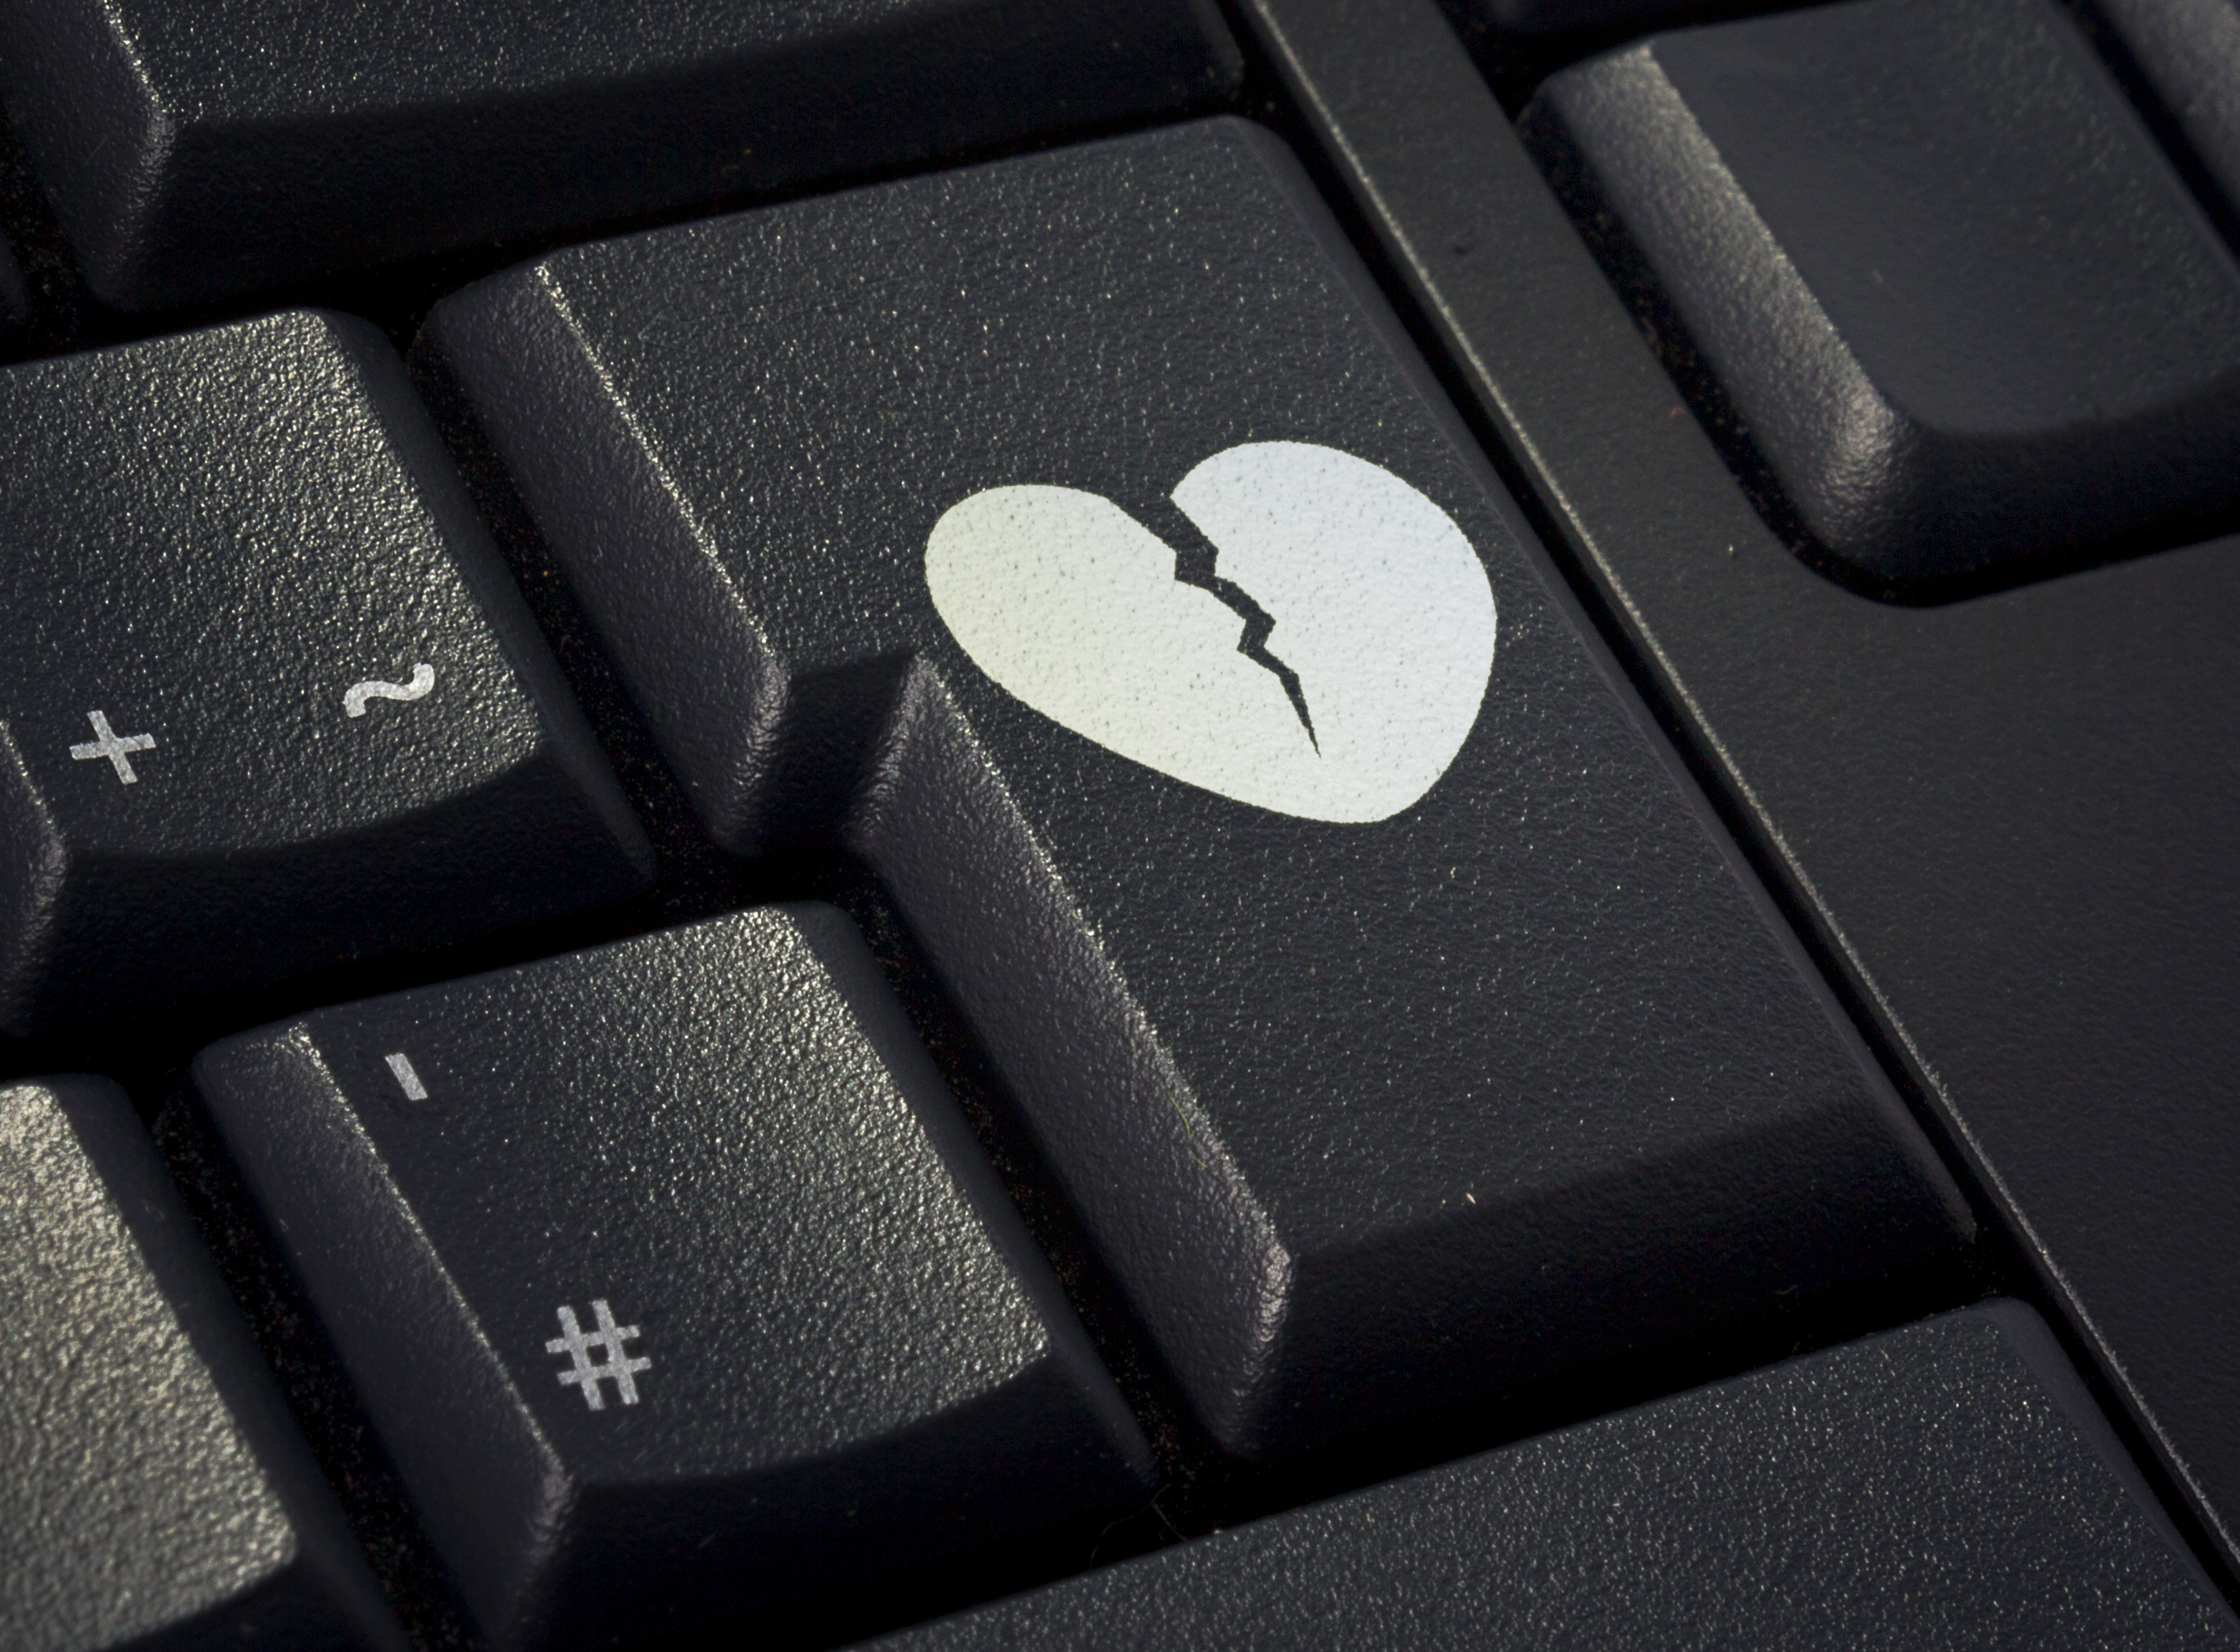 Return key of a black keyboard with the shape of a broken heart imprinted